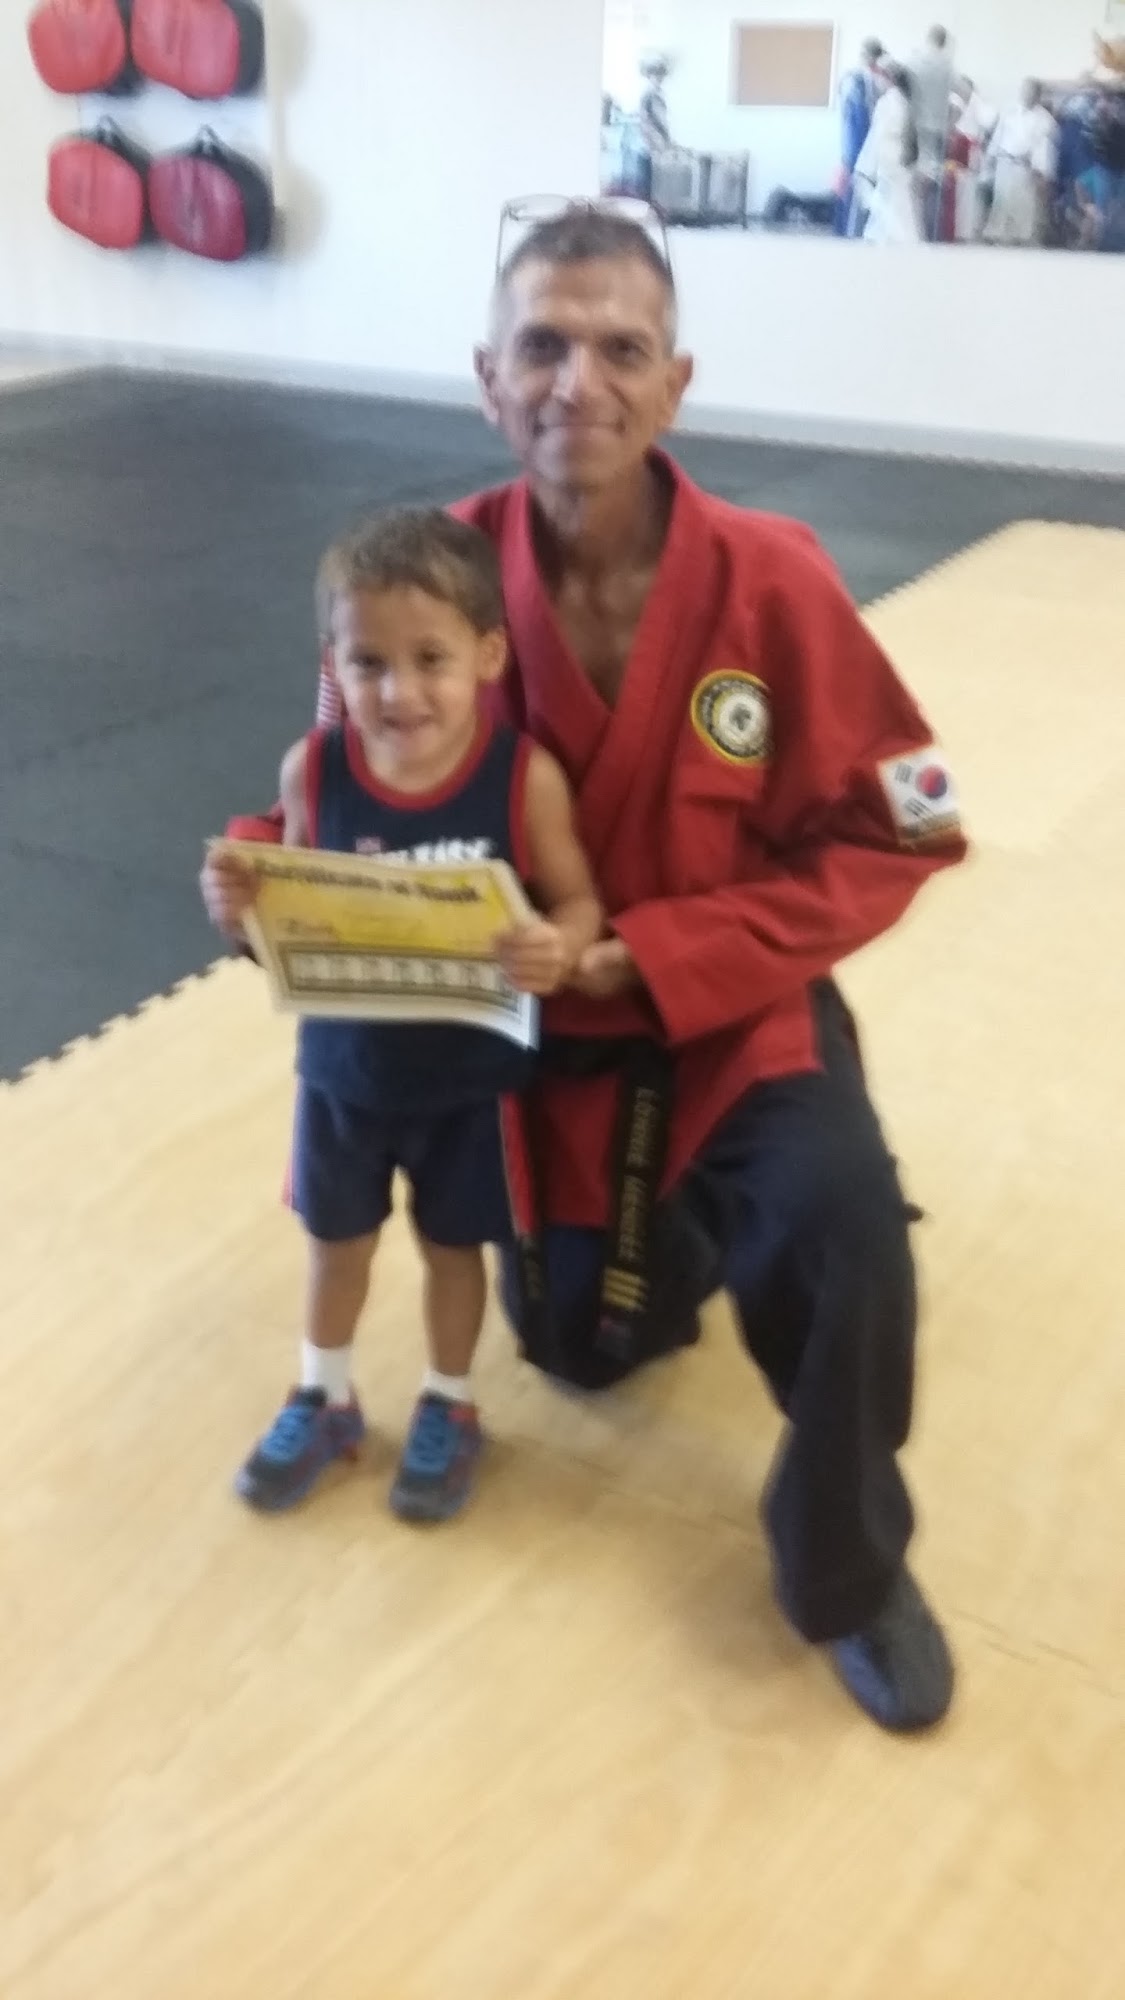 Team Chip Tae Kwon DO Center 2015 Lamar St, Sweetwater Texas 79556